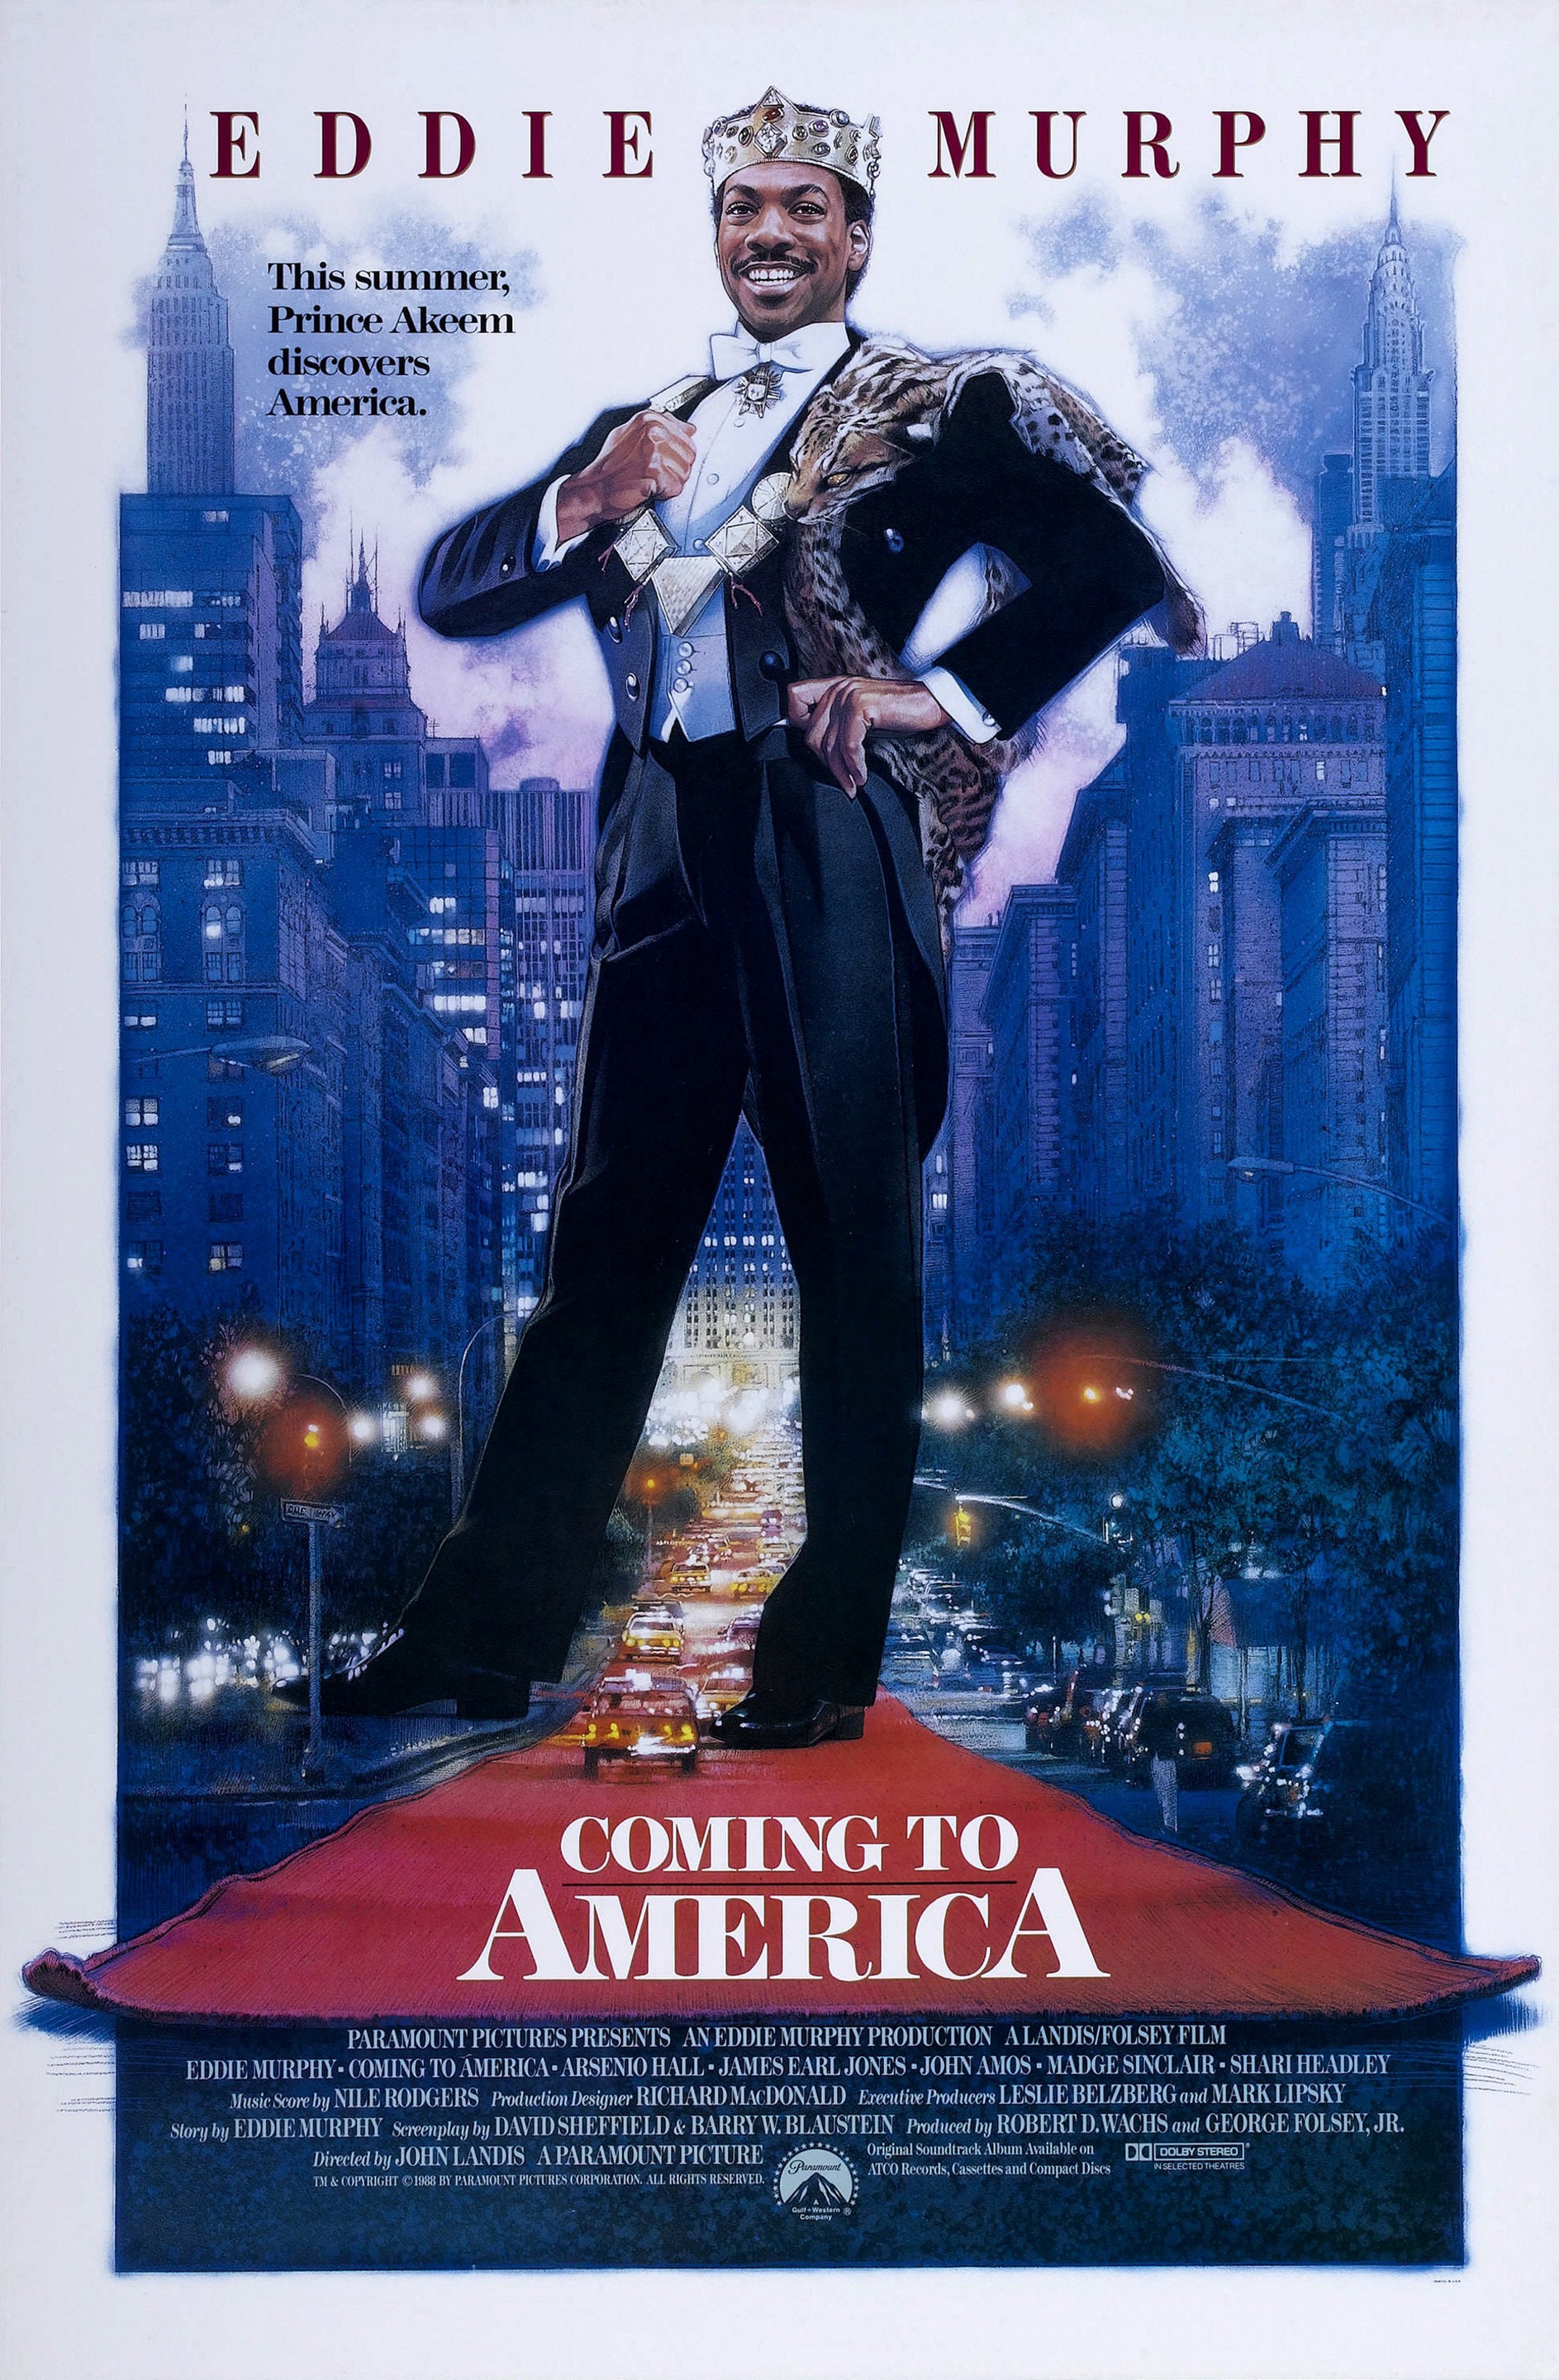 Do the Right Thing Movie Poster Glossy High Quality Print Photo